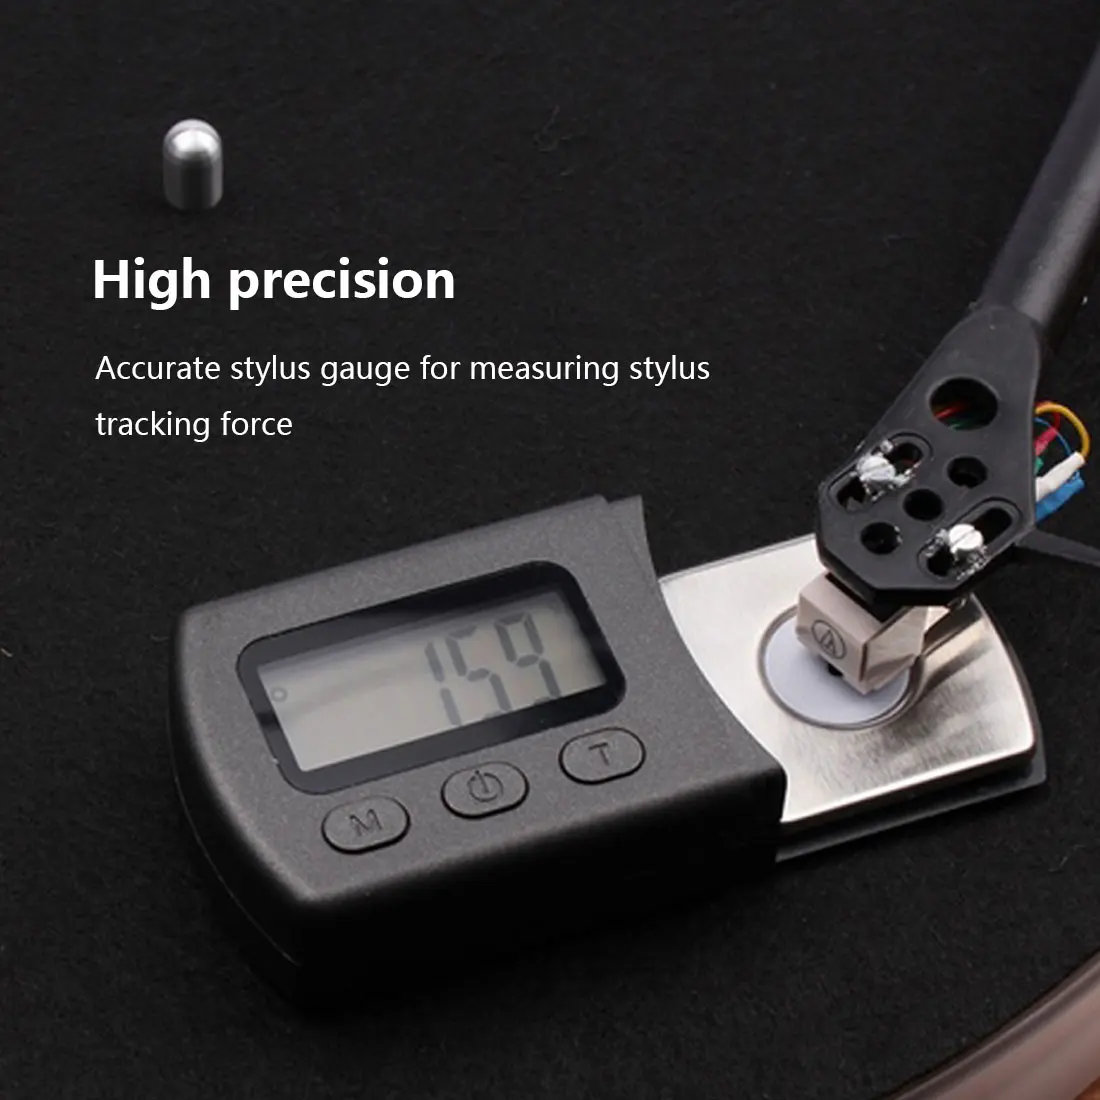 

Portable Digital Turntable Stylus Force Scale Meter Gauge LCD Backlight High Precise Tracking Guage For LP Vinyl Record Needle